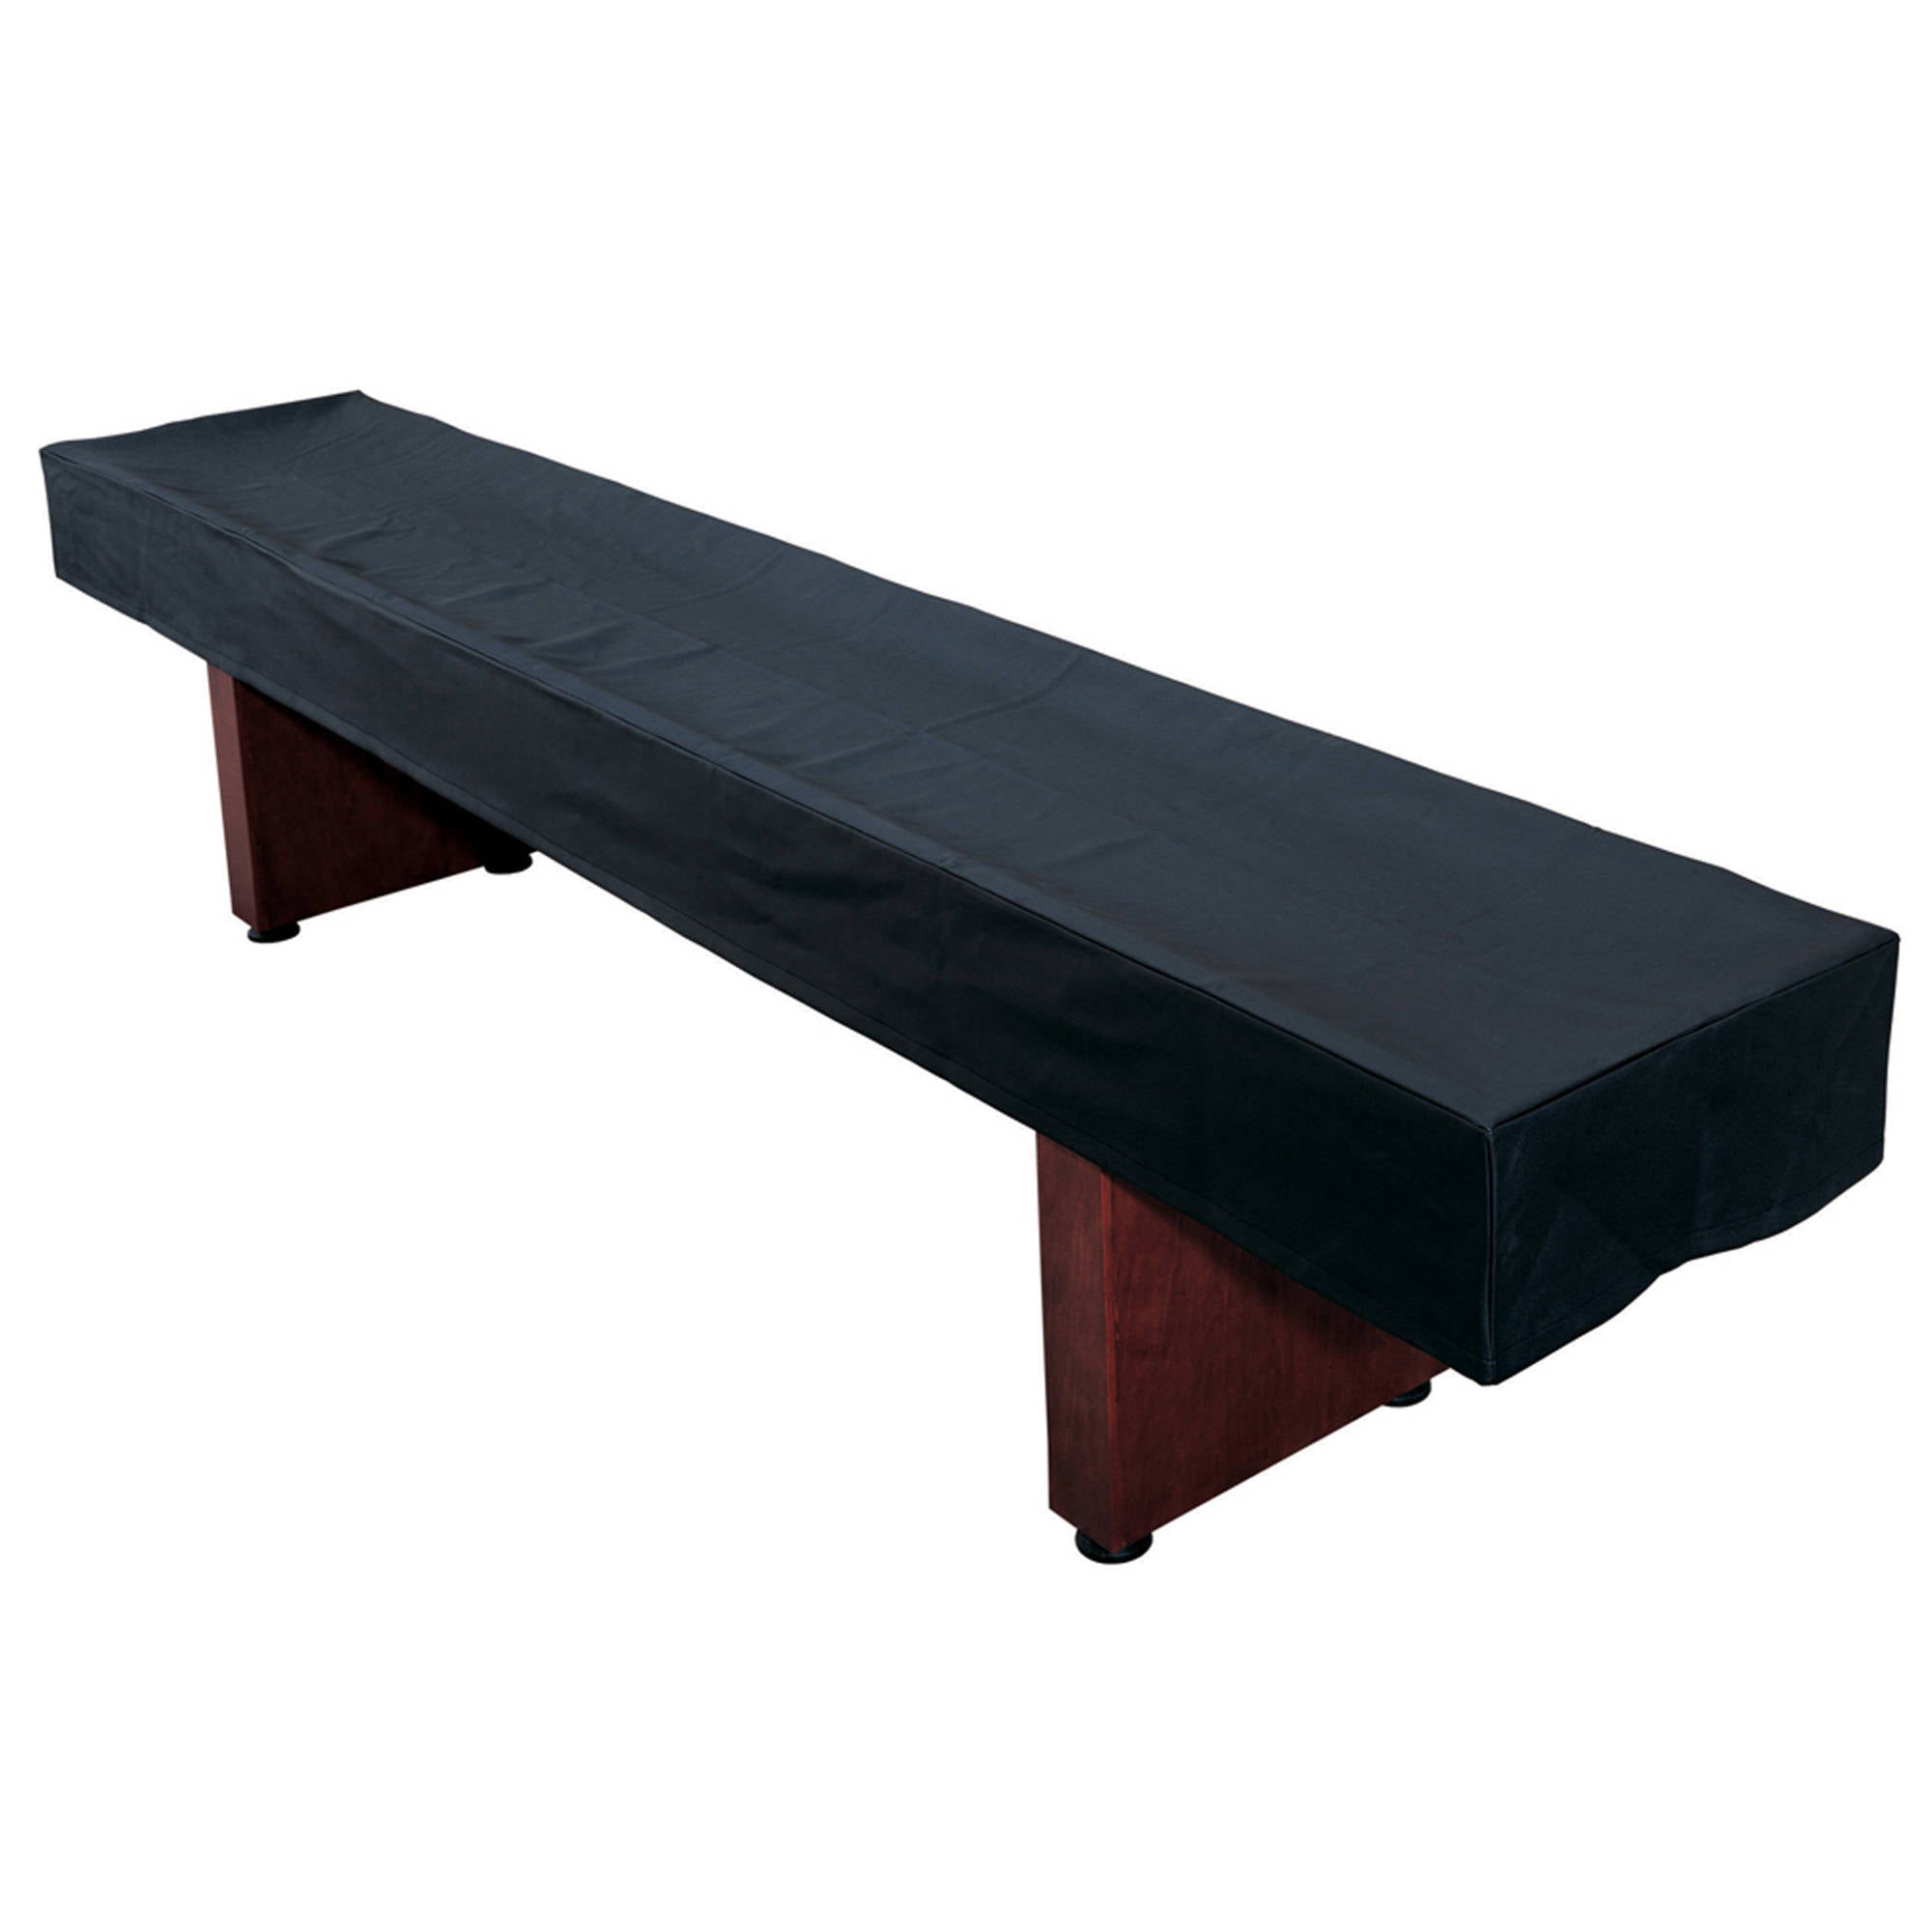 Cover for 9' Shuffleboard Table - Black